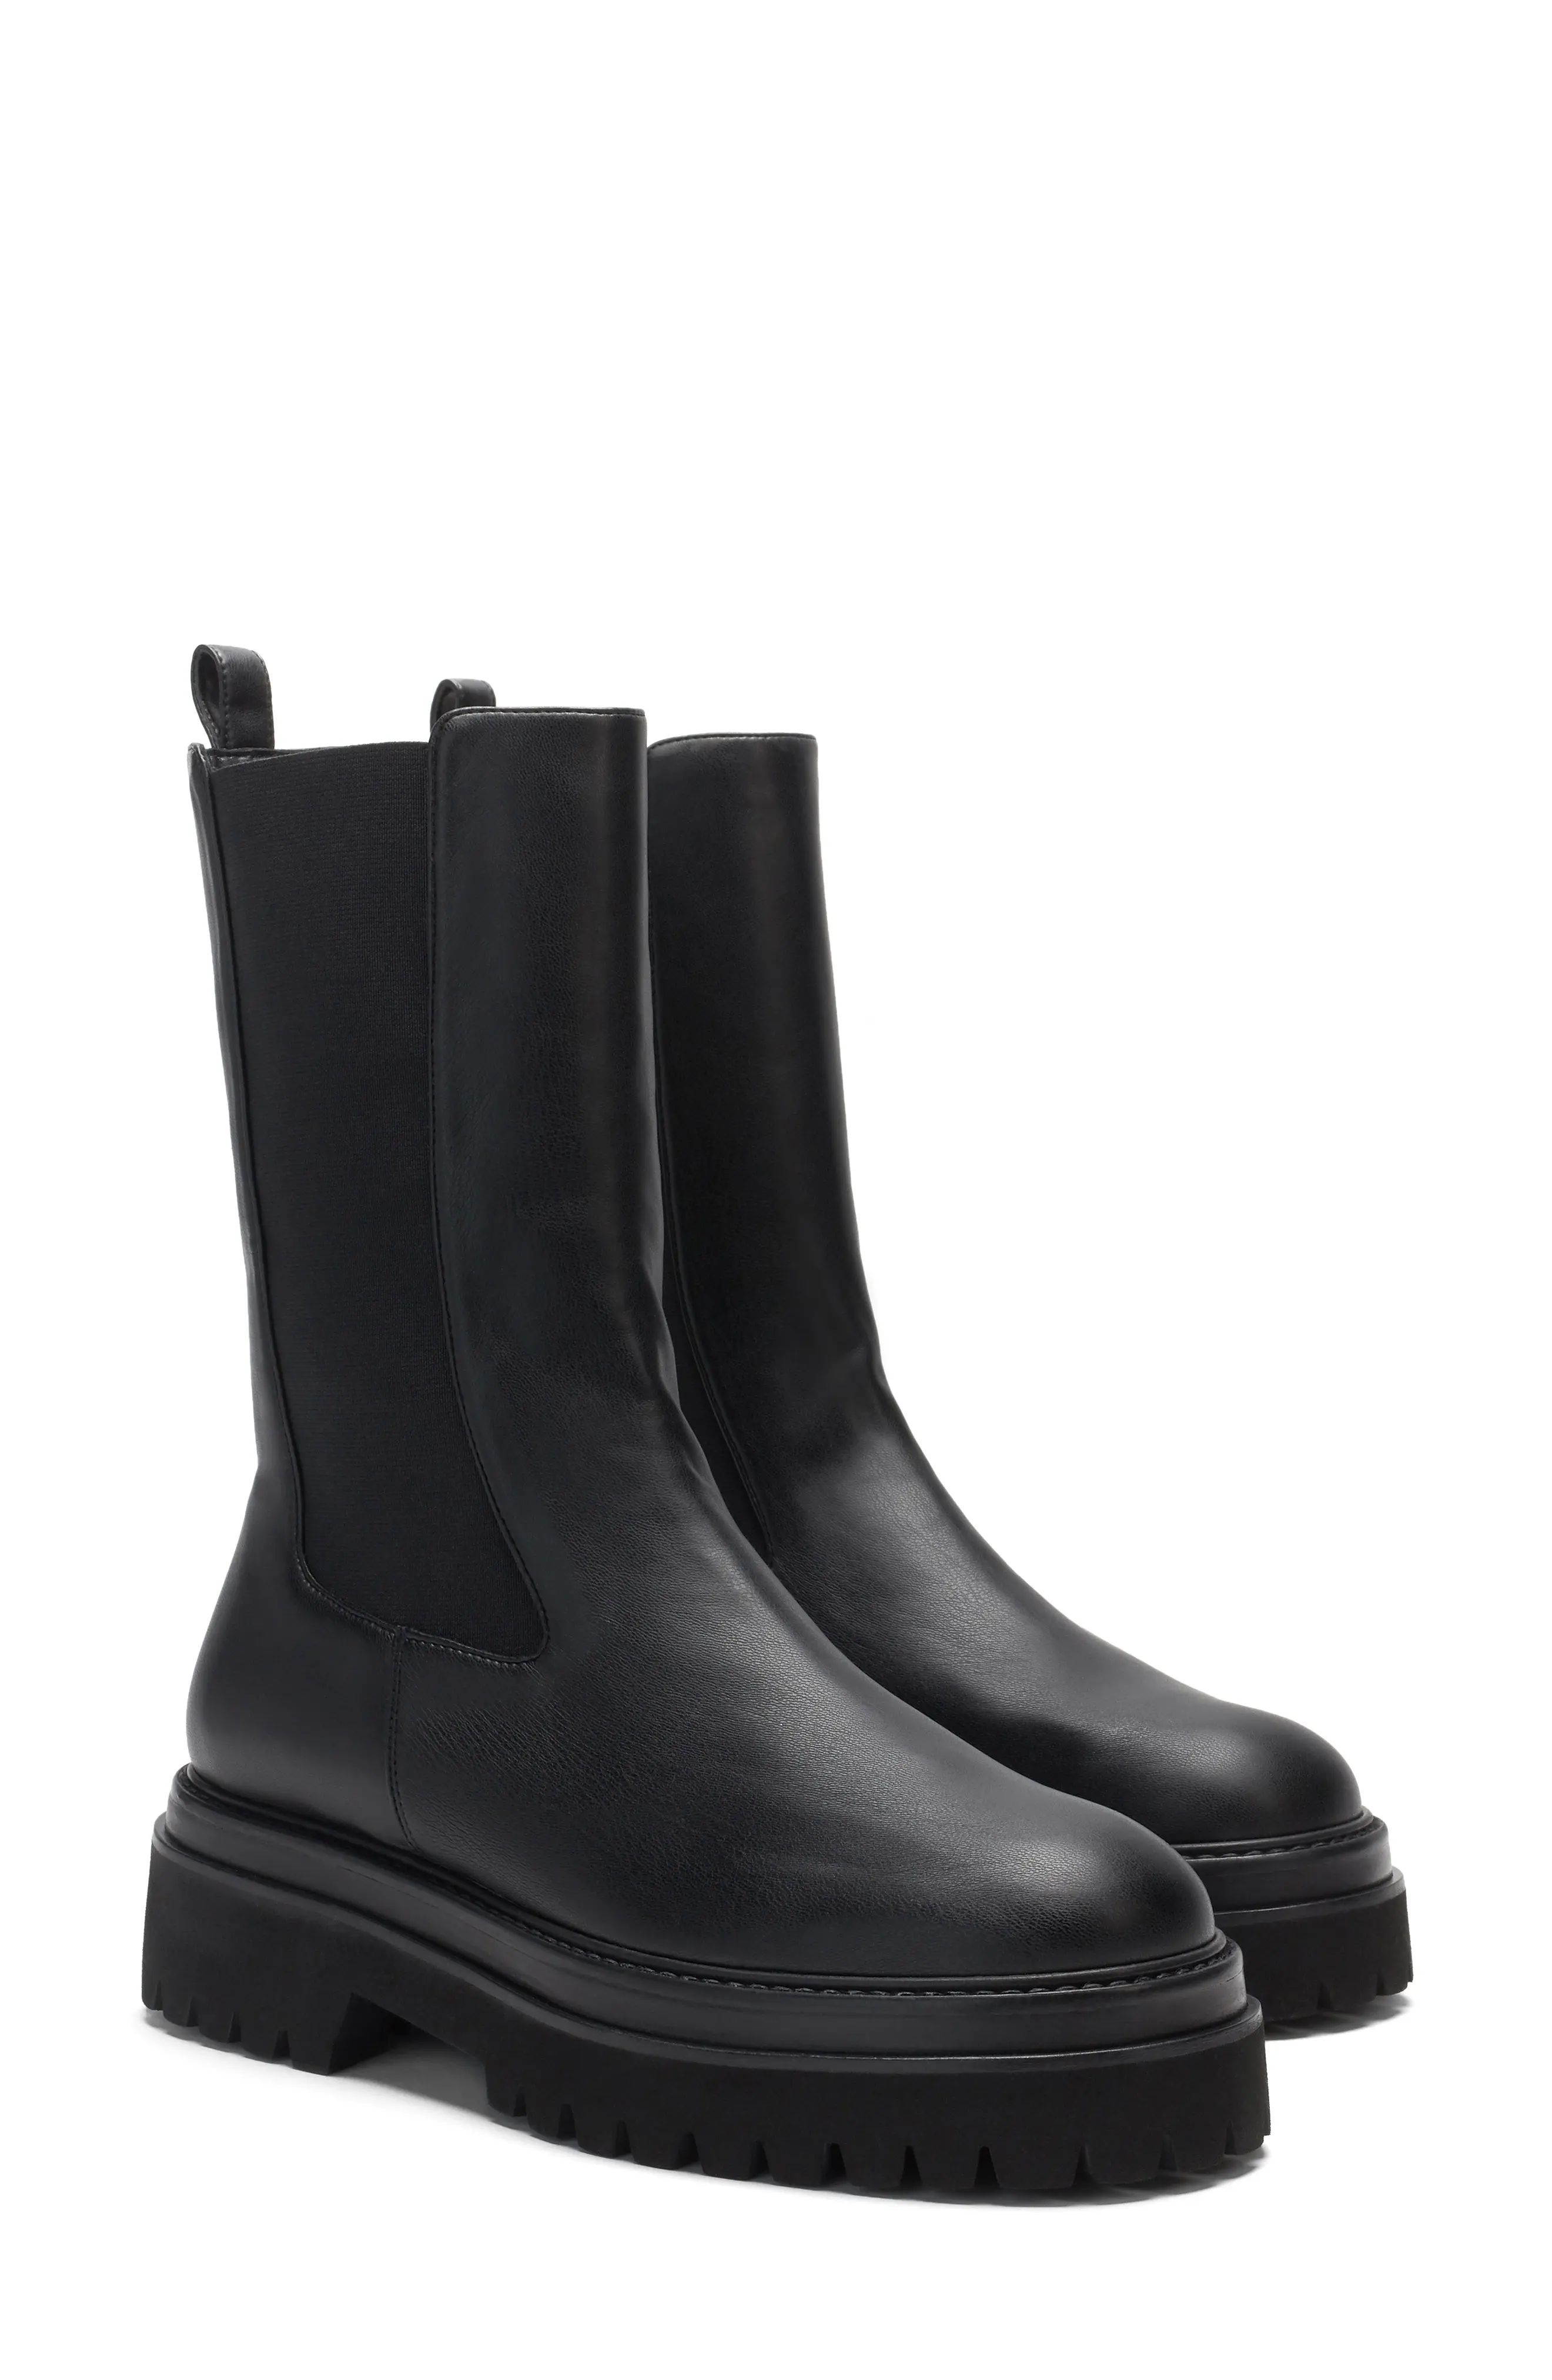 Good American Chelsea Boot, Size 6.5 in Black Leather at Nordstrom | Nordstrom